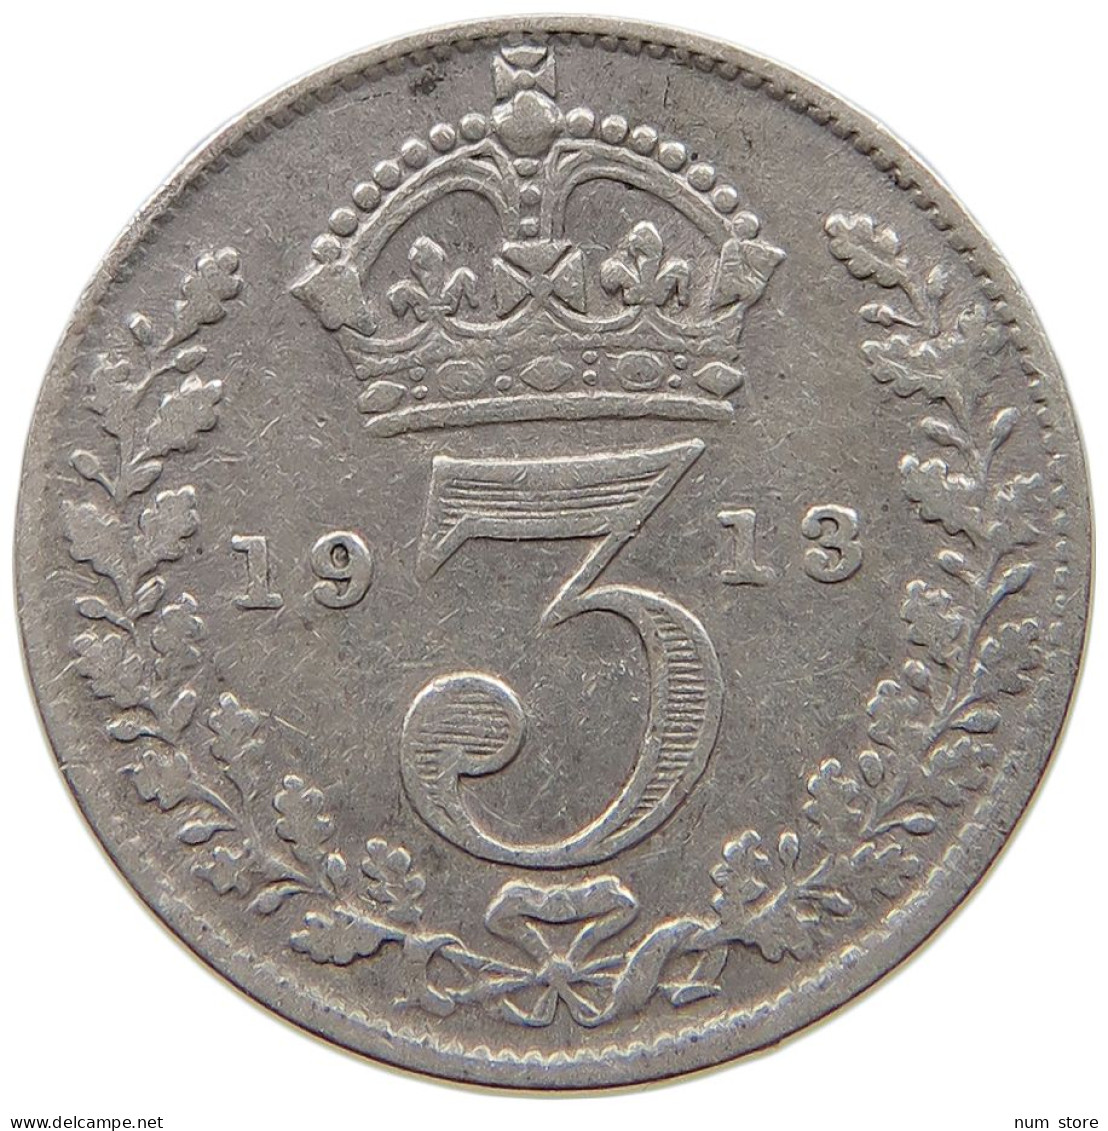 GREAT BRITAIN THREEPENCE 1913 George V. (1910-1936) #a091 0889 - F. 3 Pence